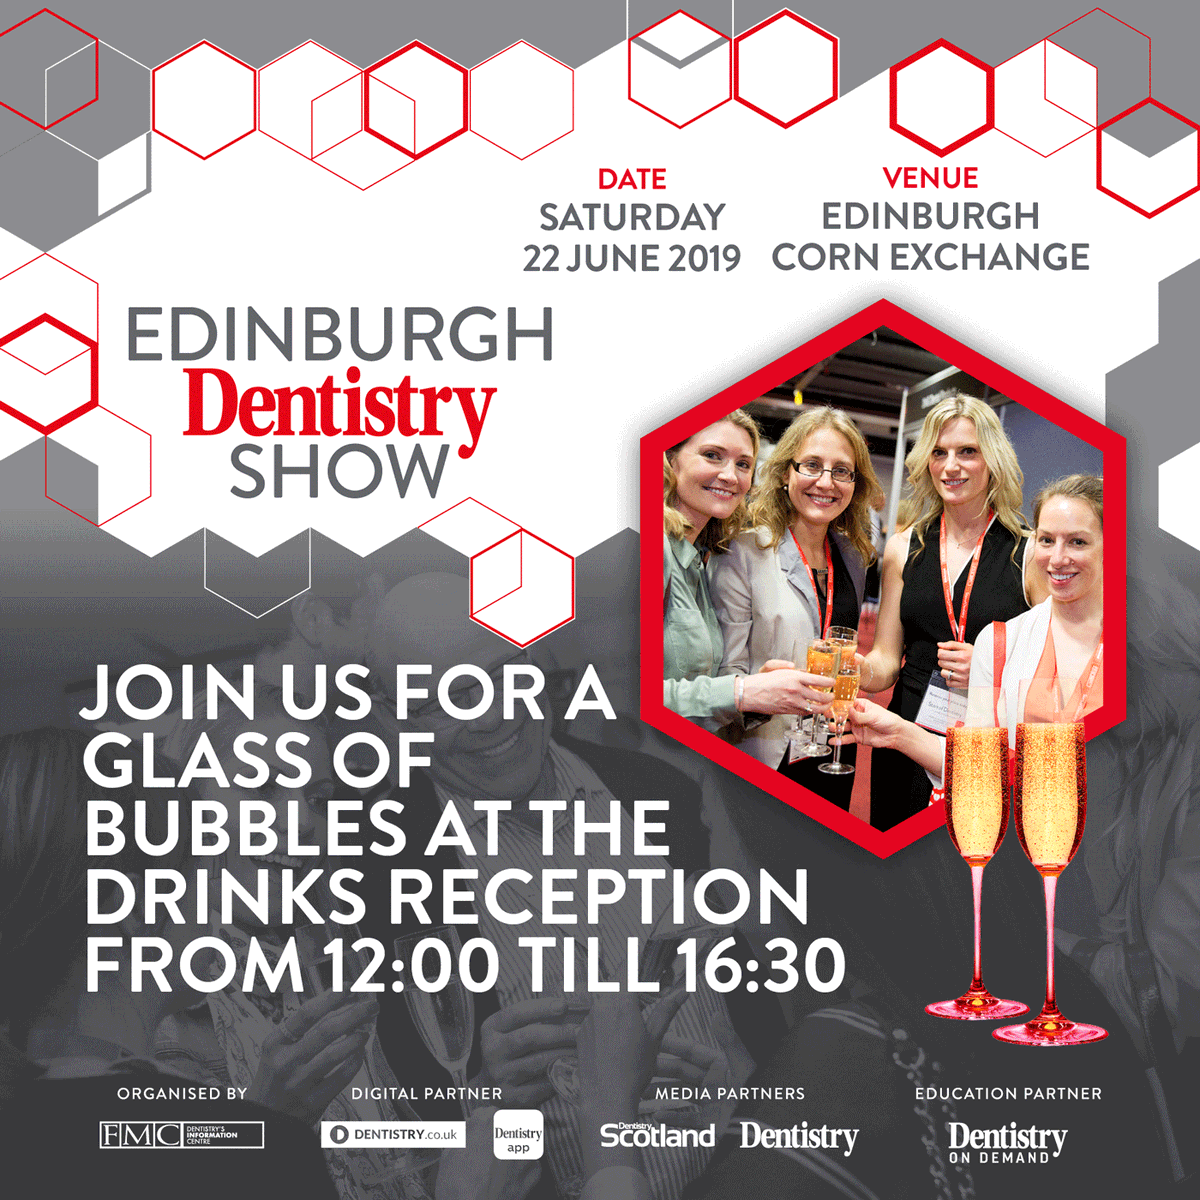 Join us for a glass of bubbles at the drinks reception from 12pm until 4:30pm at the unmissable Edinburgh Dentistry Show. Register now& attend for free!
👉 bit.ly/2X1Mf6a 👈  

#edinburghdentistryshow #dentist #dentistry #digitaldentistry #dentistlife #dentistedinburgh